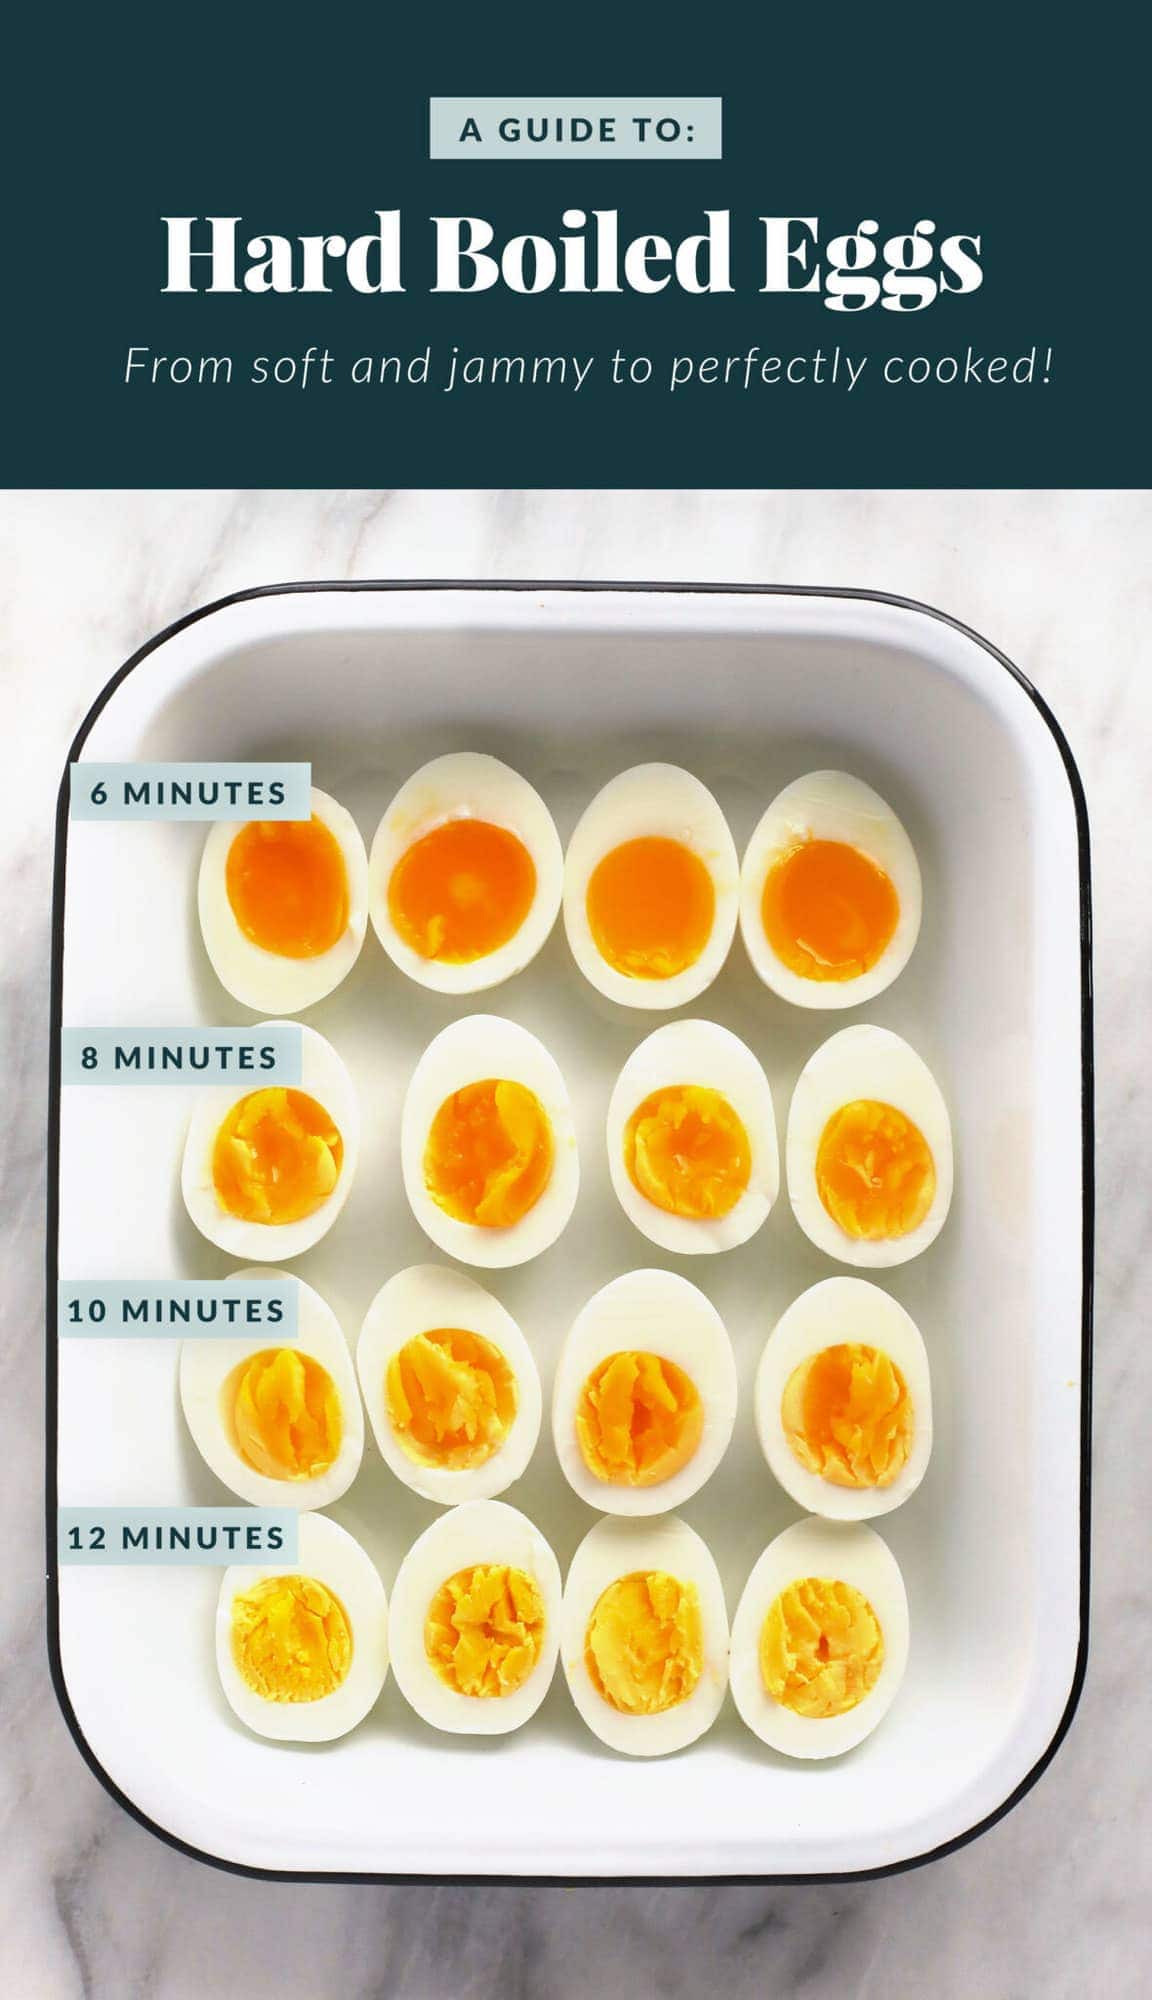 https://fitfoodiefinds.com/wp-content/uploads/2021/01/hard-boild-eggs-graphic-1180x2048-2.jpg